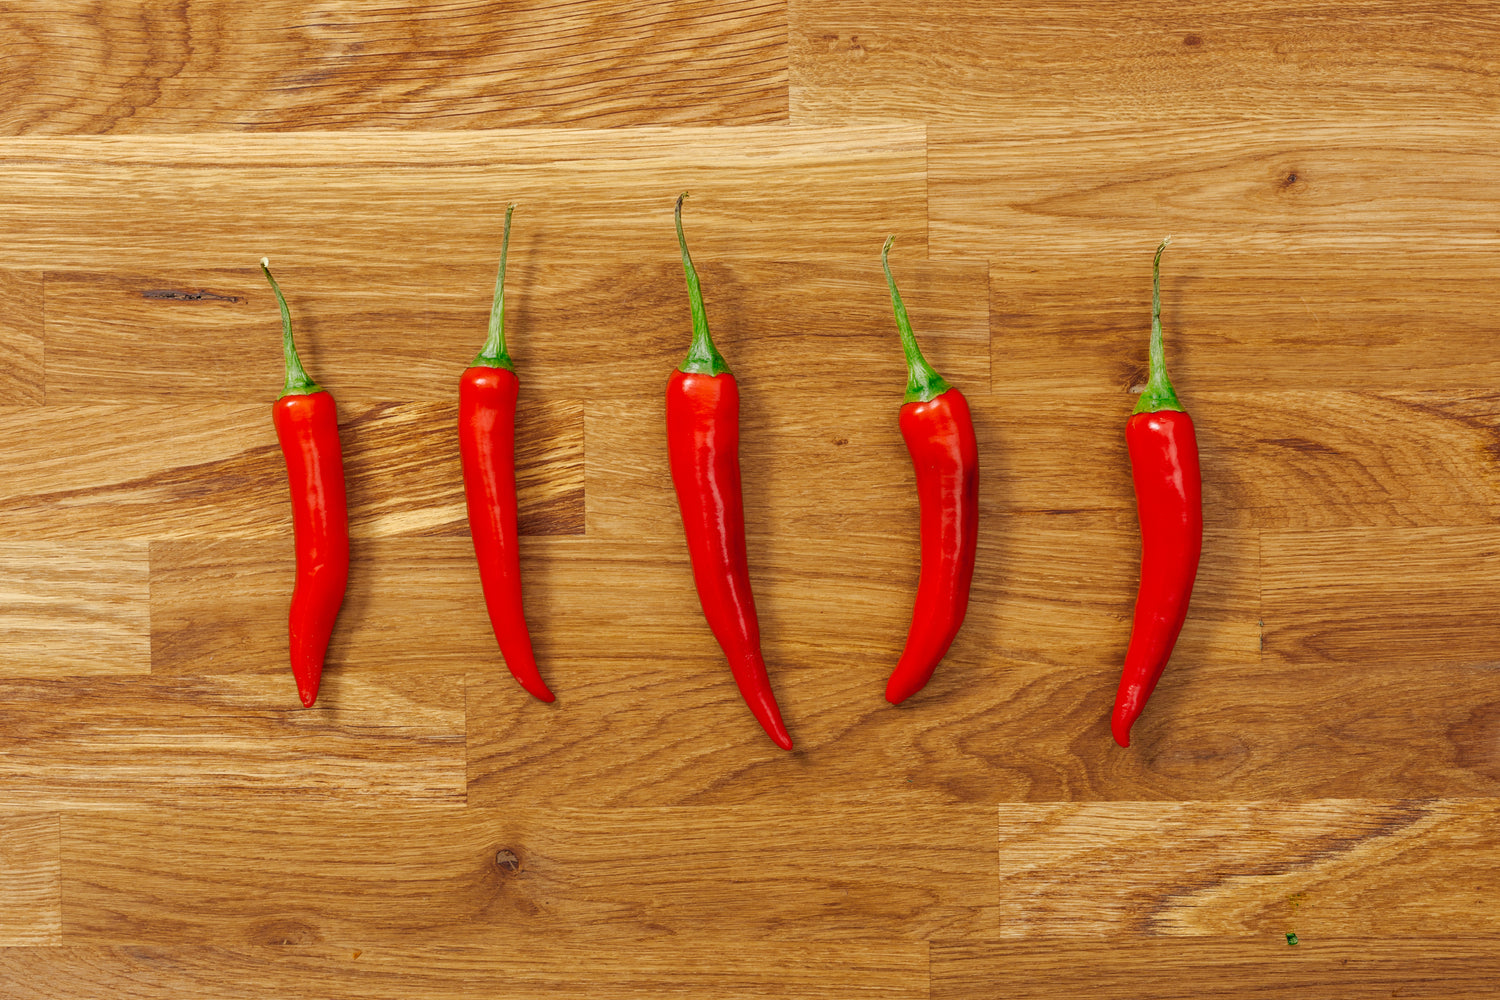 Five hot red chili peppers lined up horizontally on a wood carving board